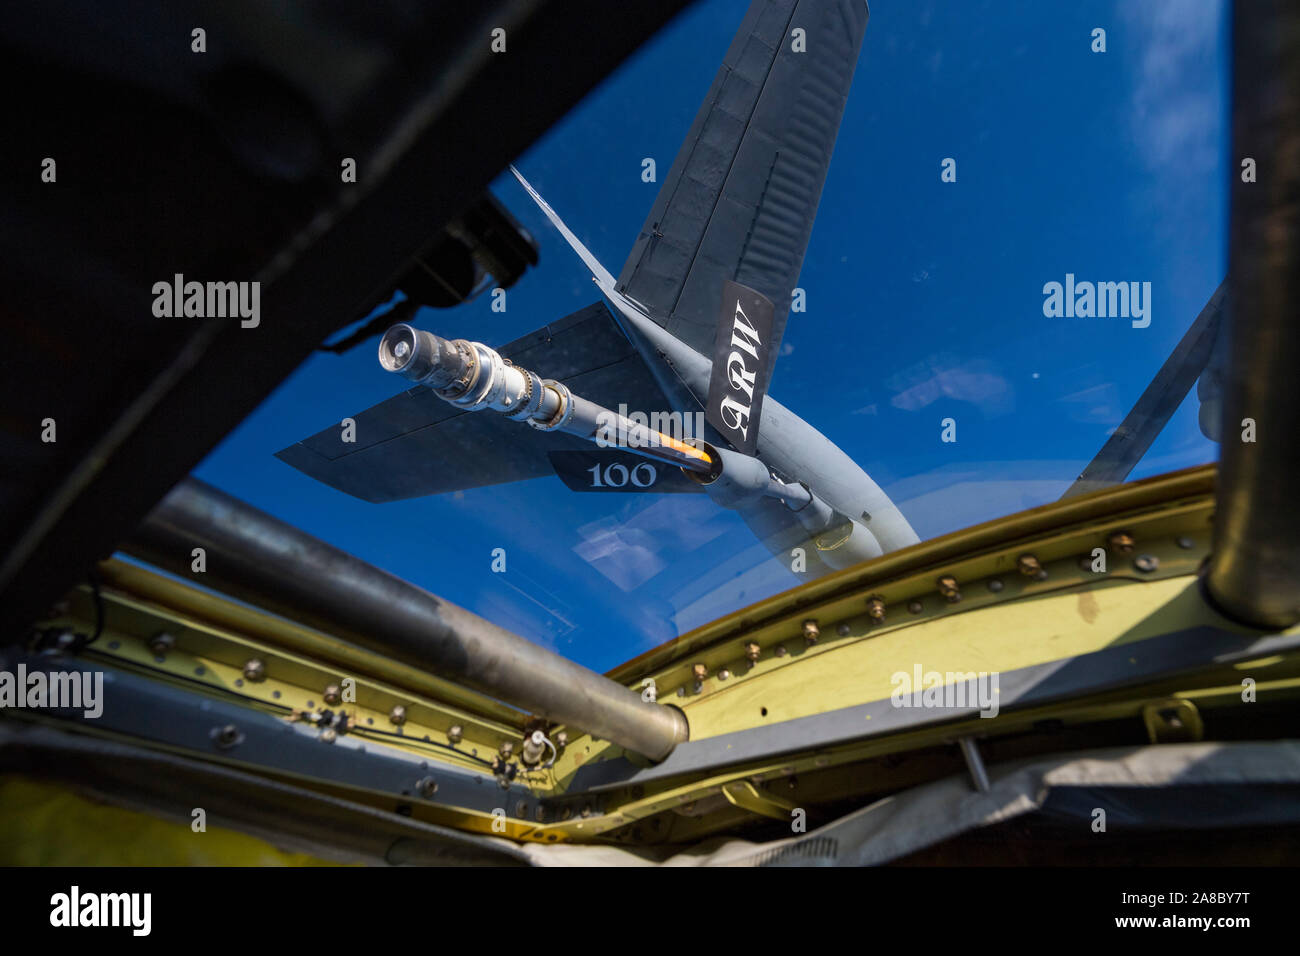 A U.S. Air Force 100th Air Refueling Wing KC-135 Stratoandker refuels a U.S. Air Force 2nd Bomb Wing B-52H Stratofortress during training and integration with the Royal Norwegian Air Force in support of Bomber Task Force Europe 20-1, Nov. 6, 2019, Barents Sea region. This deployment allows aircrews and support personnel to conduct theater integration and to improve bomber interoperability with joint partners and allied nations. (U.S. Air Force photo by Tech. Sgt. Christopher Ruano) Stock Photo